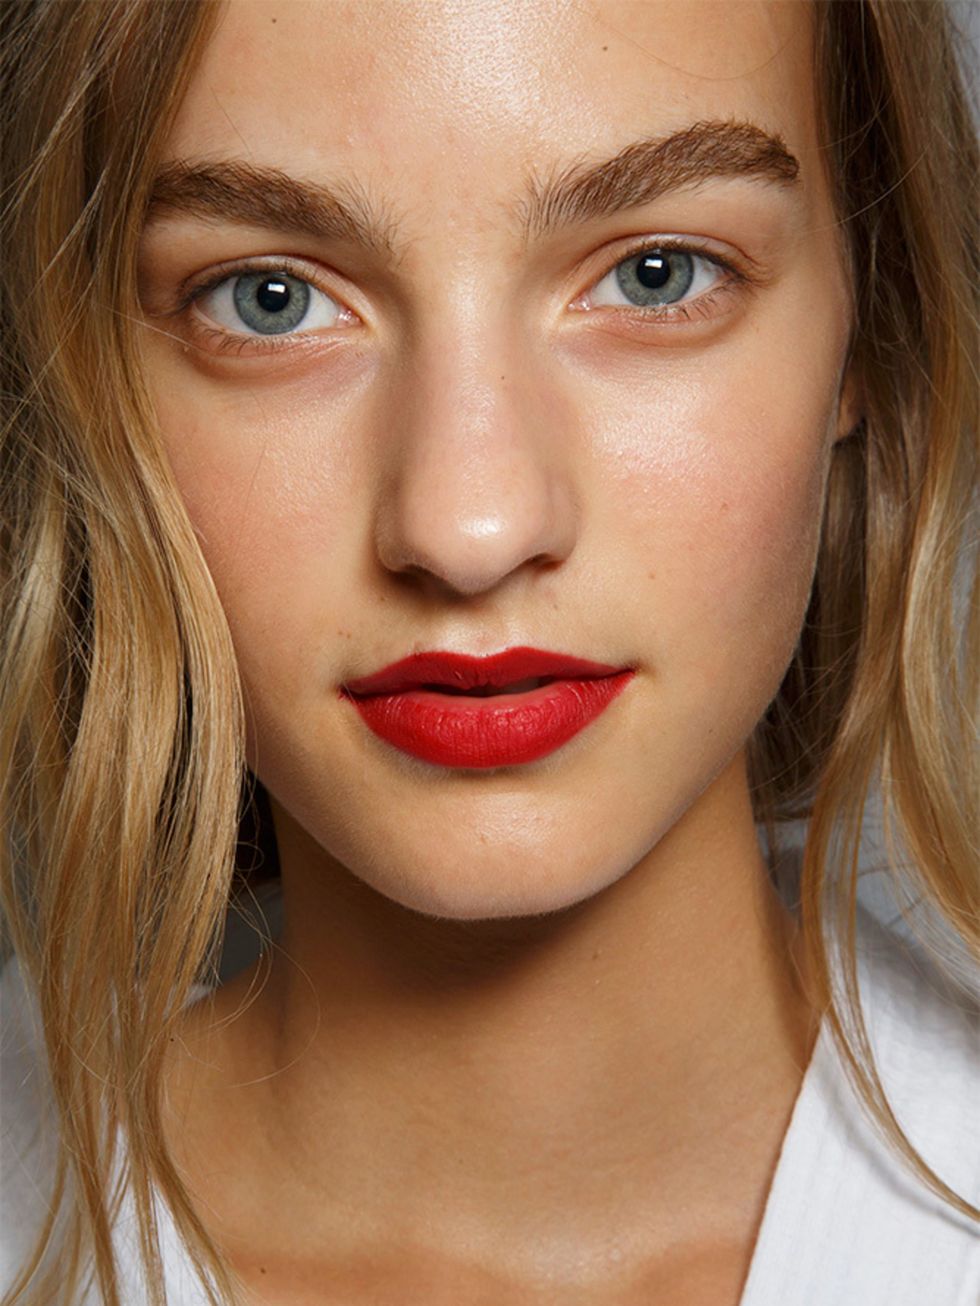 <p>Burberry</p>

<p>The look: Rose petal lips</p>

<p>Make-up artist: Wendy Rowe</p>

<p>Key products: <a href="http://uk.burberry.com/fresh-glow-luminous-fluid-base-golden-radiance-no02-p38856271" target="_blank">Burberry Fresh Glow Foundation in Golden,